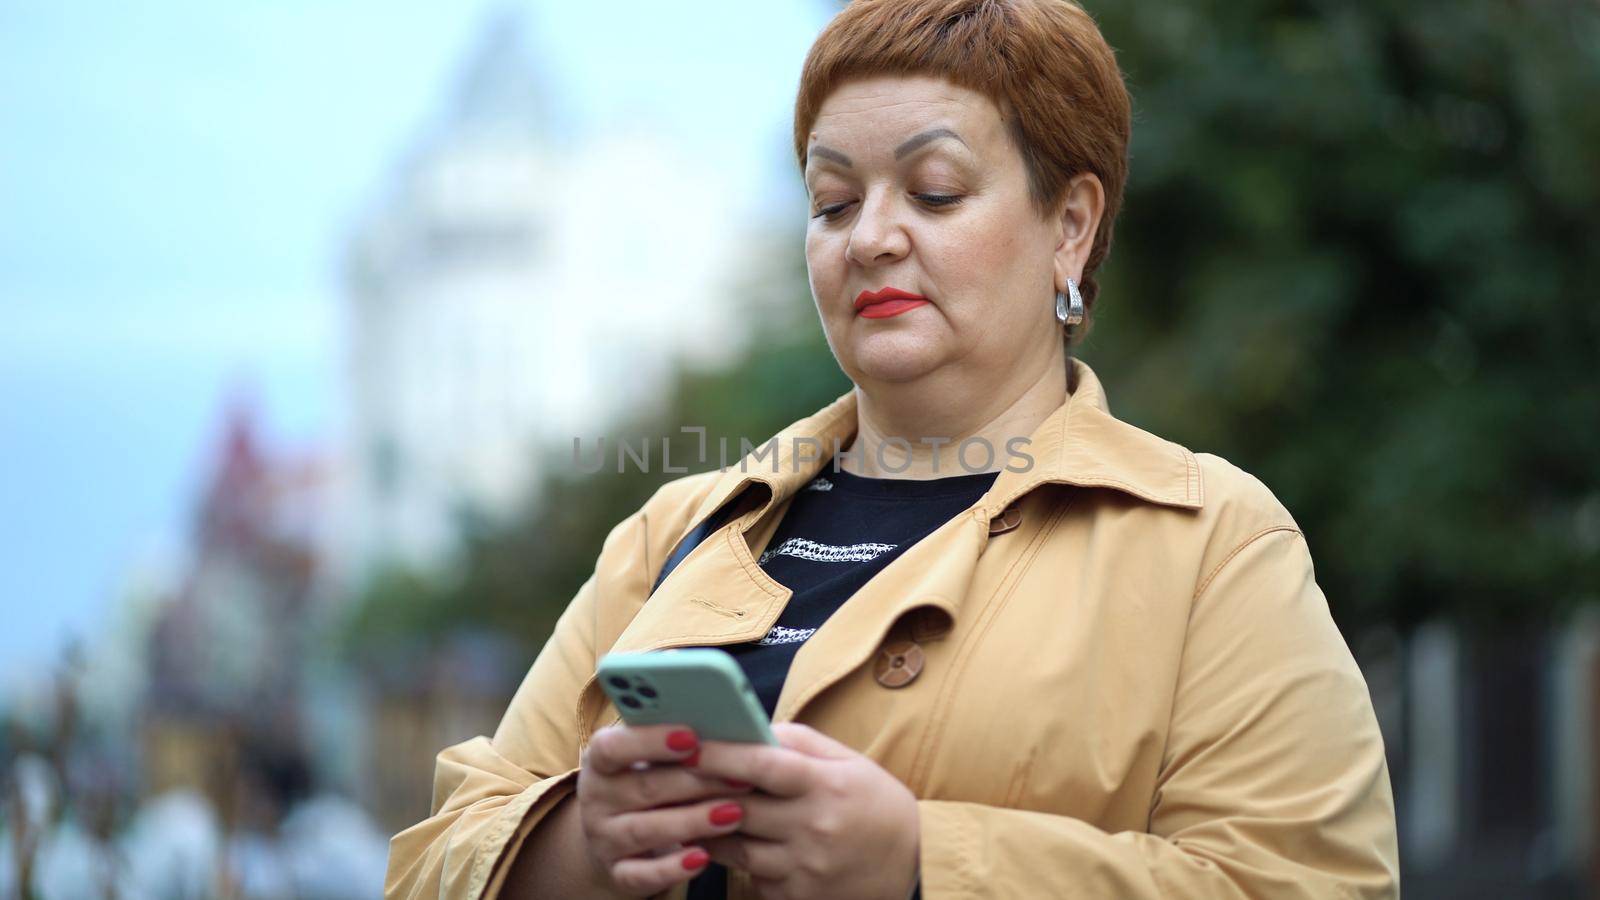 An elegant woman with short red hair and a raincoat is standing on the street and using a smartphone.